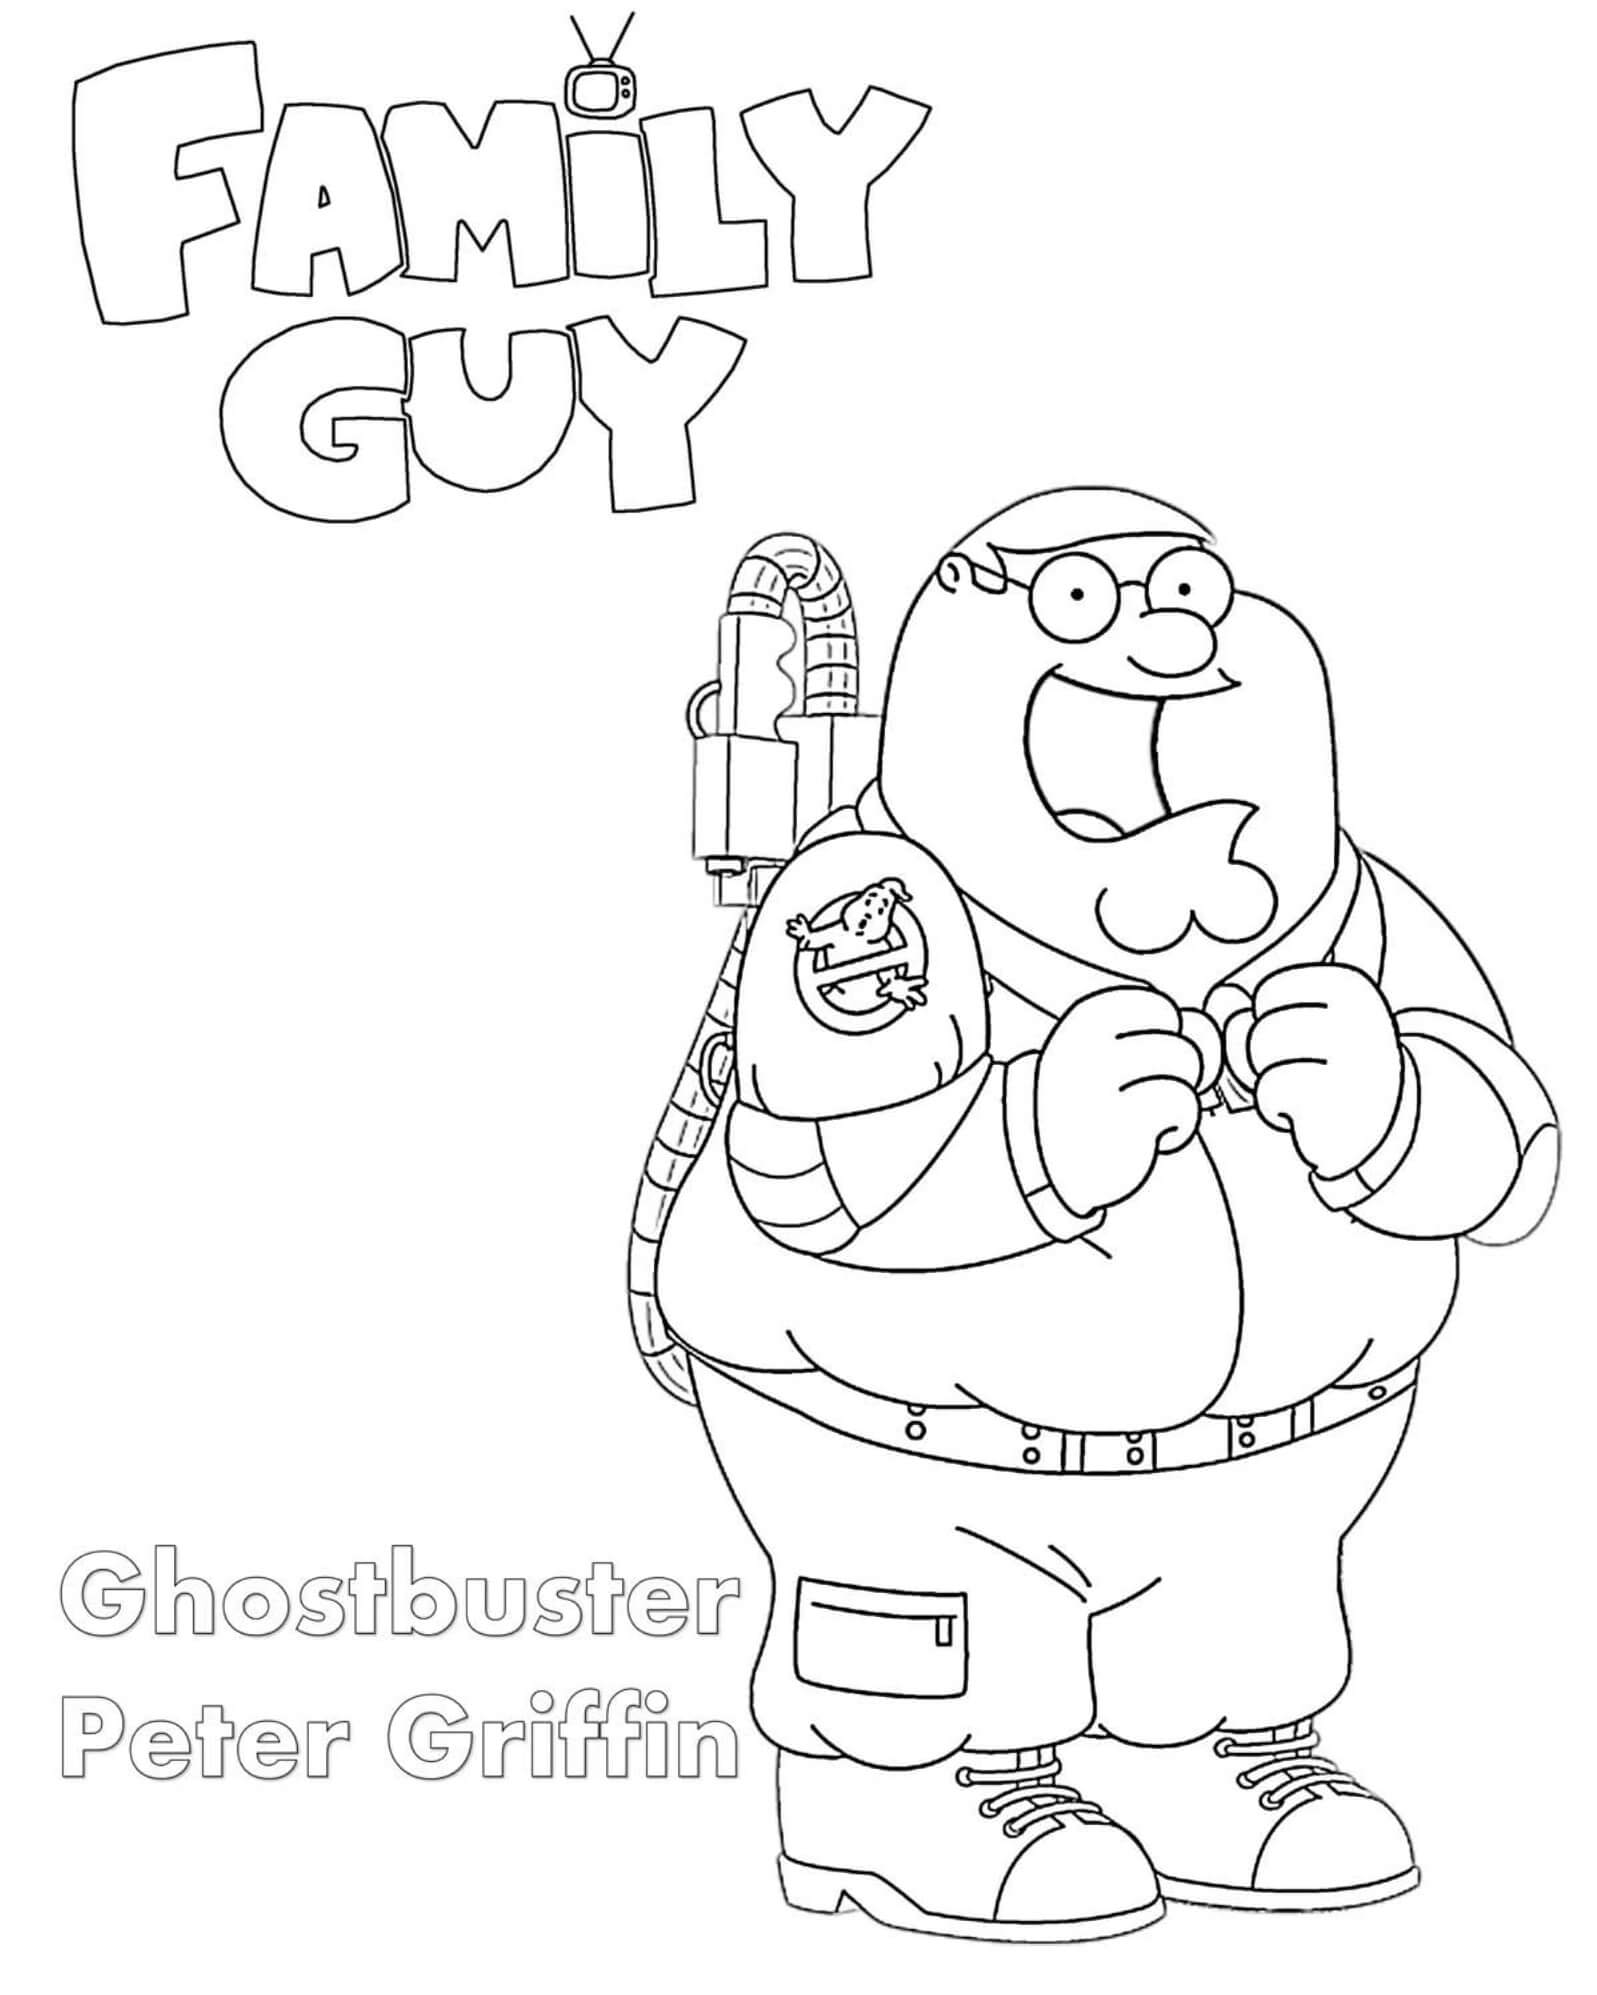 Family Guy Ghostbuster Peter